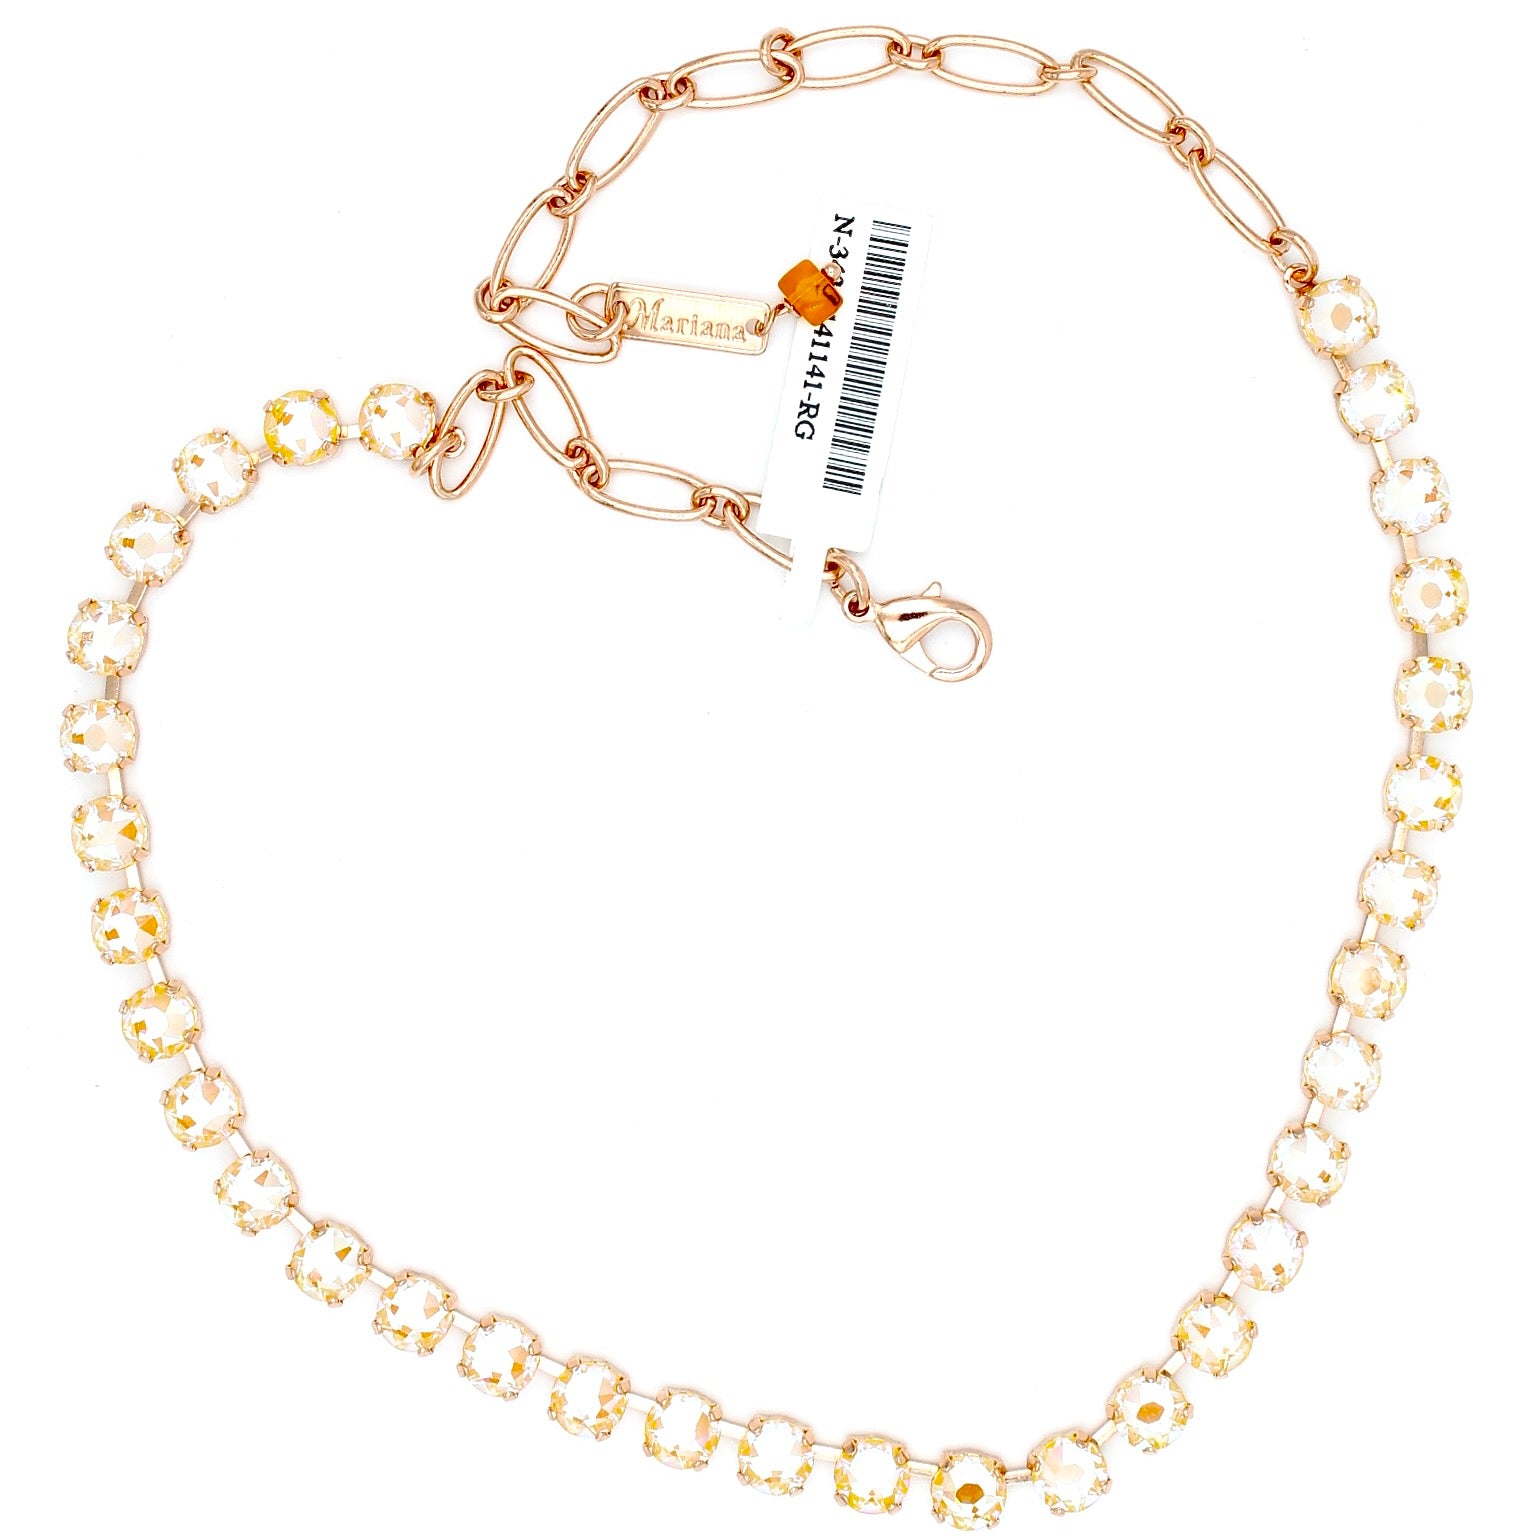 Sunshine Sunkissed 7MM Necklace in Rose Gold - MaryTyke's